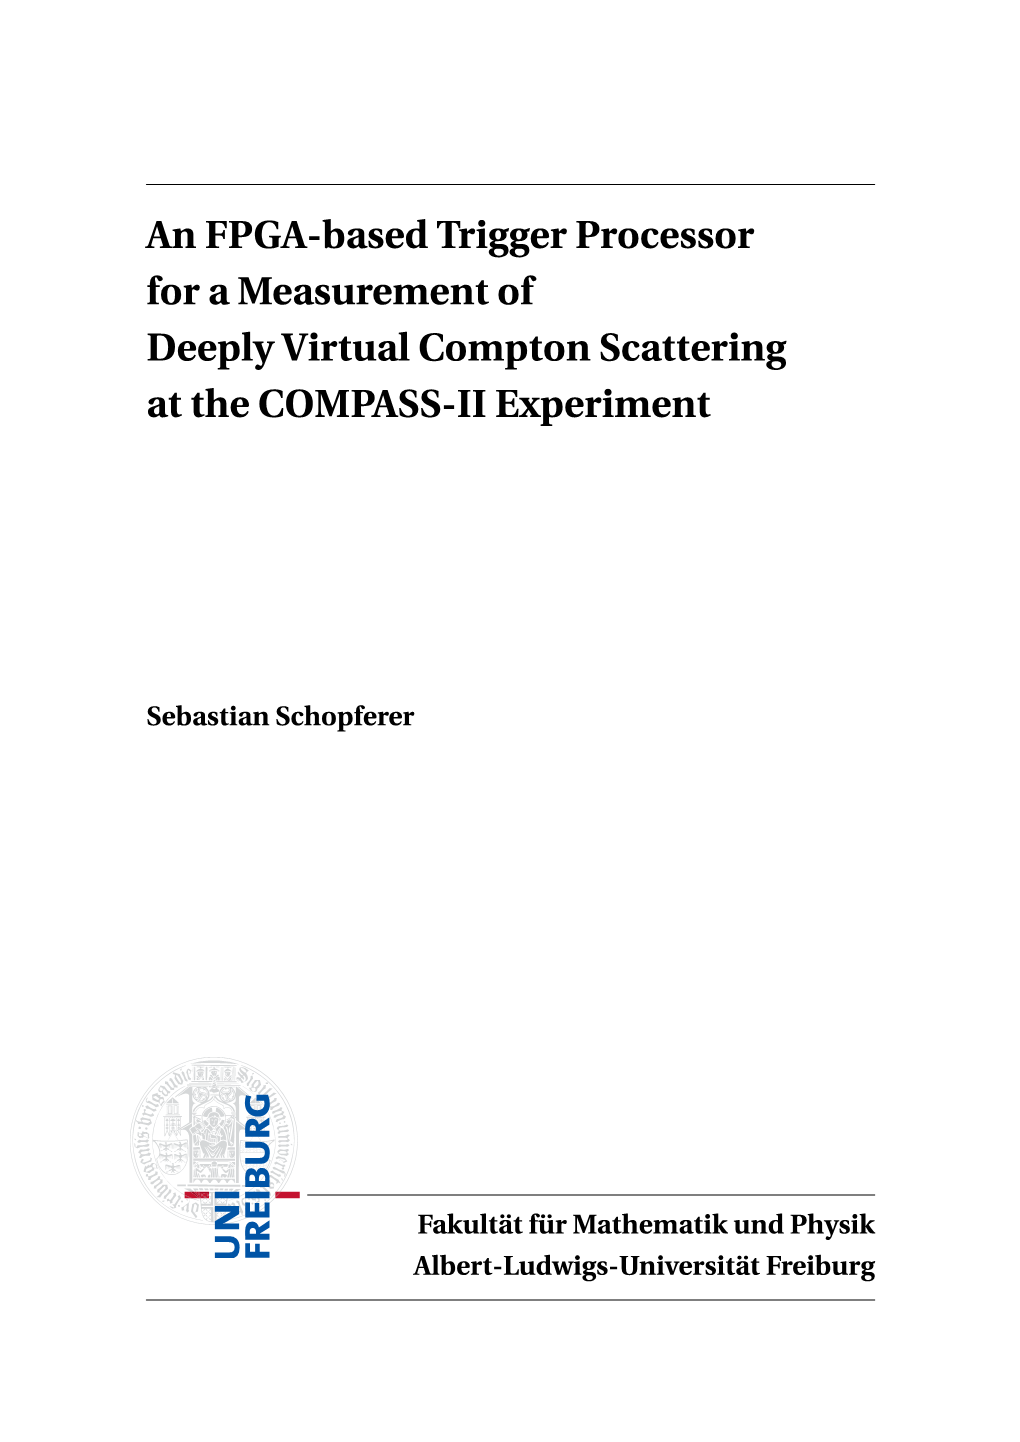 An FPGA-Based Trigger Processor for a Measurement of Deeply Virtual Compton Scattering at the COMPASS-II Experiment